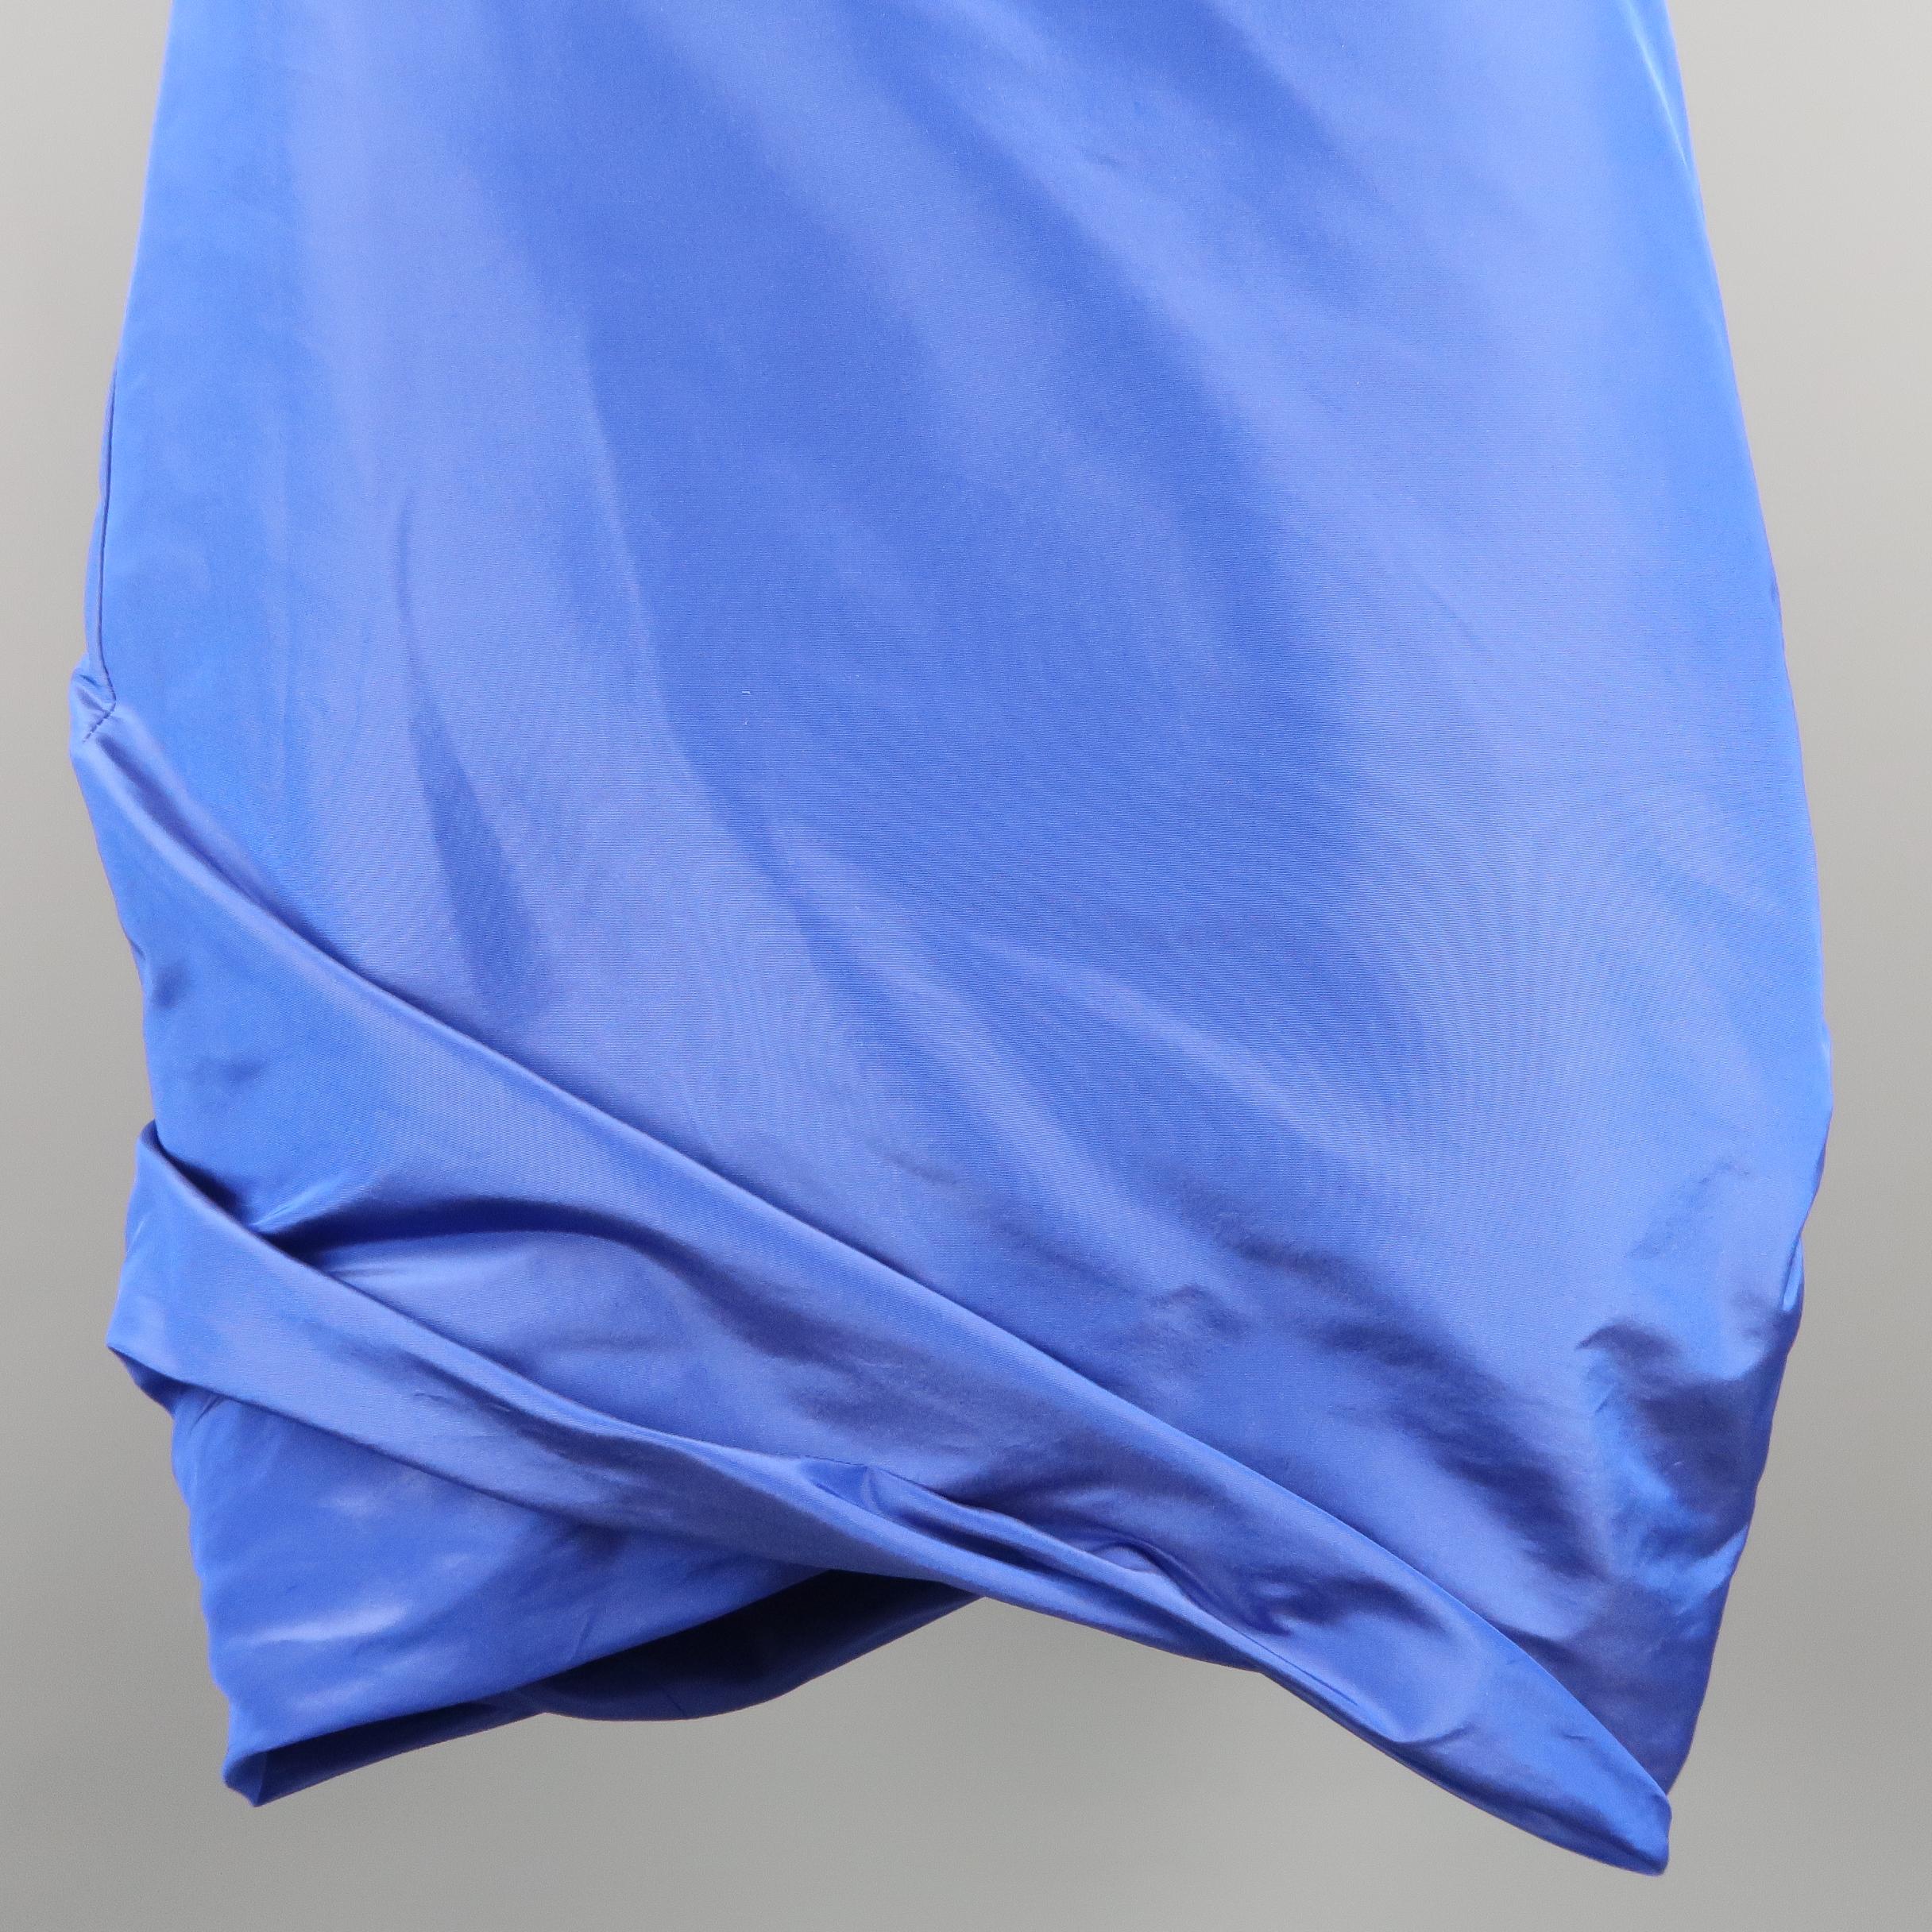 PAUW sporty asymmetrical skirt, comes in a blue tone silk, featuring a bubble hem. Made in Belgium.
 
Excellent Pre-Owned Condition.
Marked: 1
 
Measurements:
 
Waist: 30 in.
Hip: 38 in.
Length: 25 in.